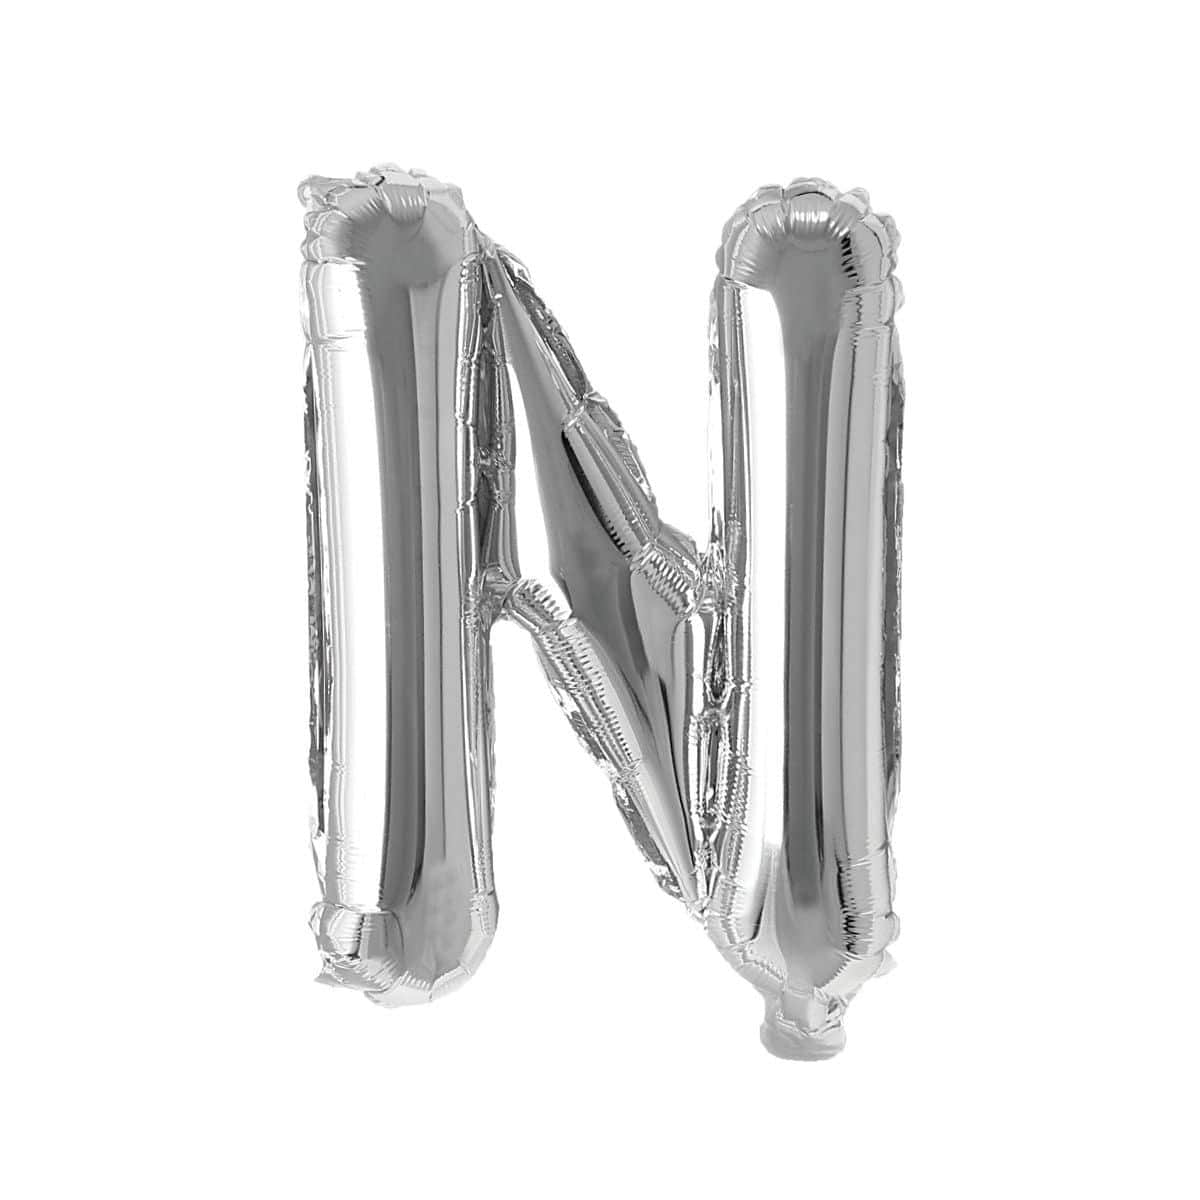 Buy Balloons Silver Letter N Foil Balloon, 16 Inches sold at Party Expert